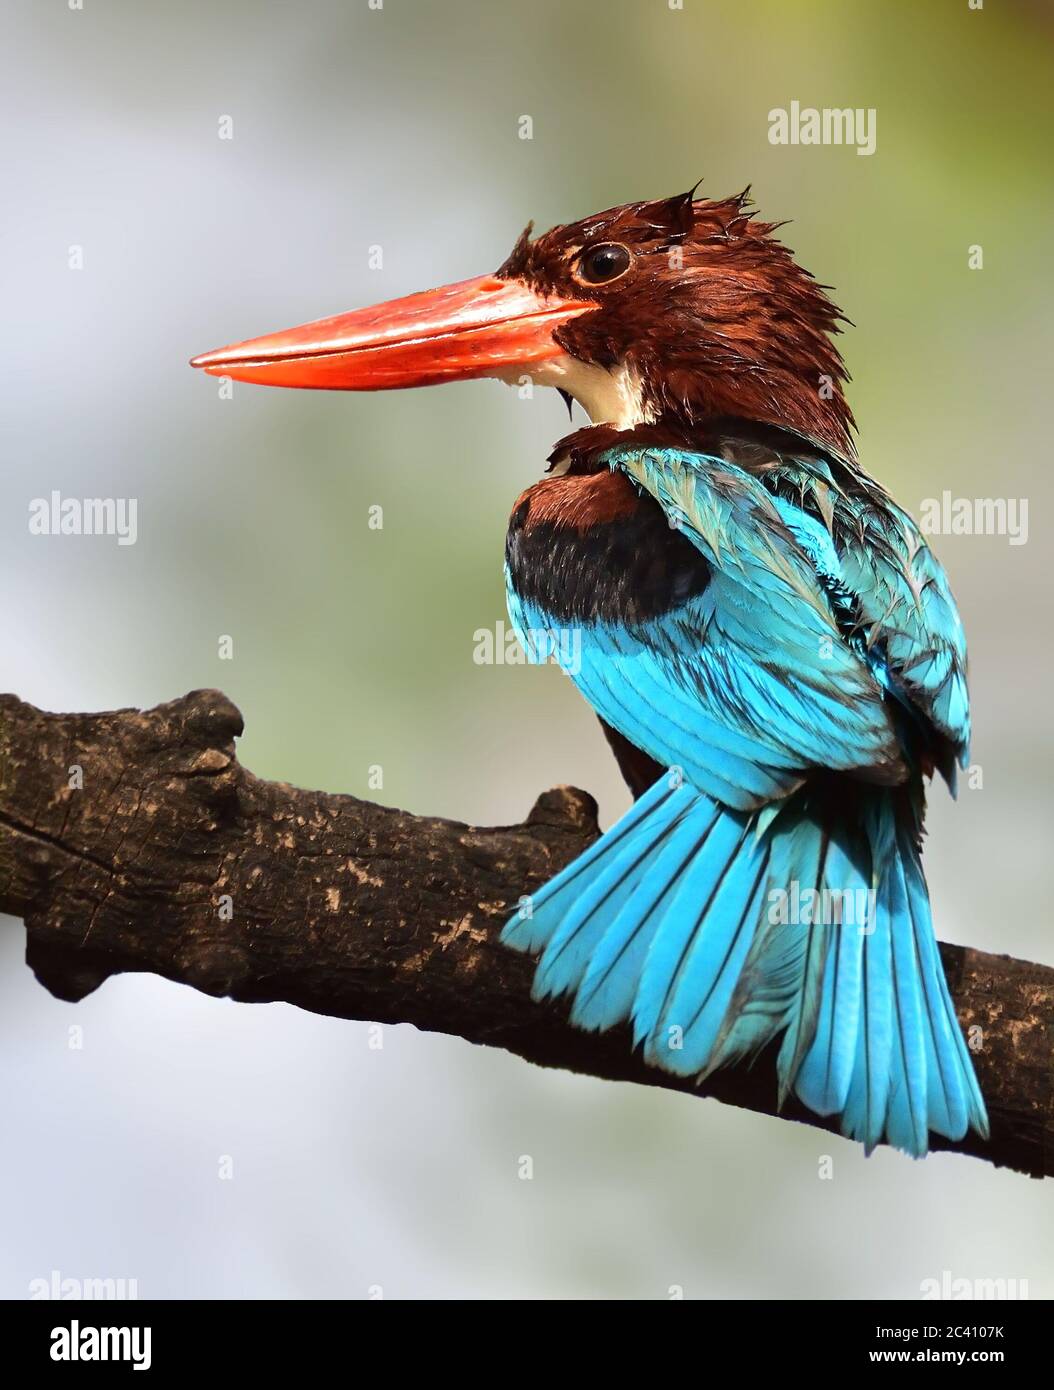 The white-throated kingfisher also known as the white-breasted kingfisher is a tree kingfisher, widely distributed in Asia. Stock Photo